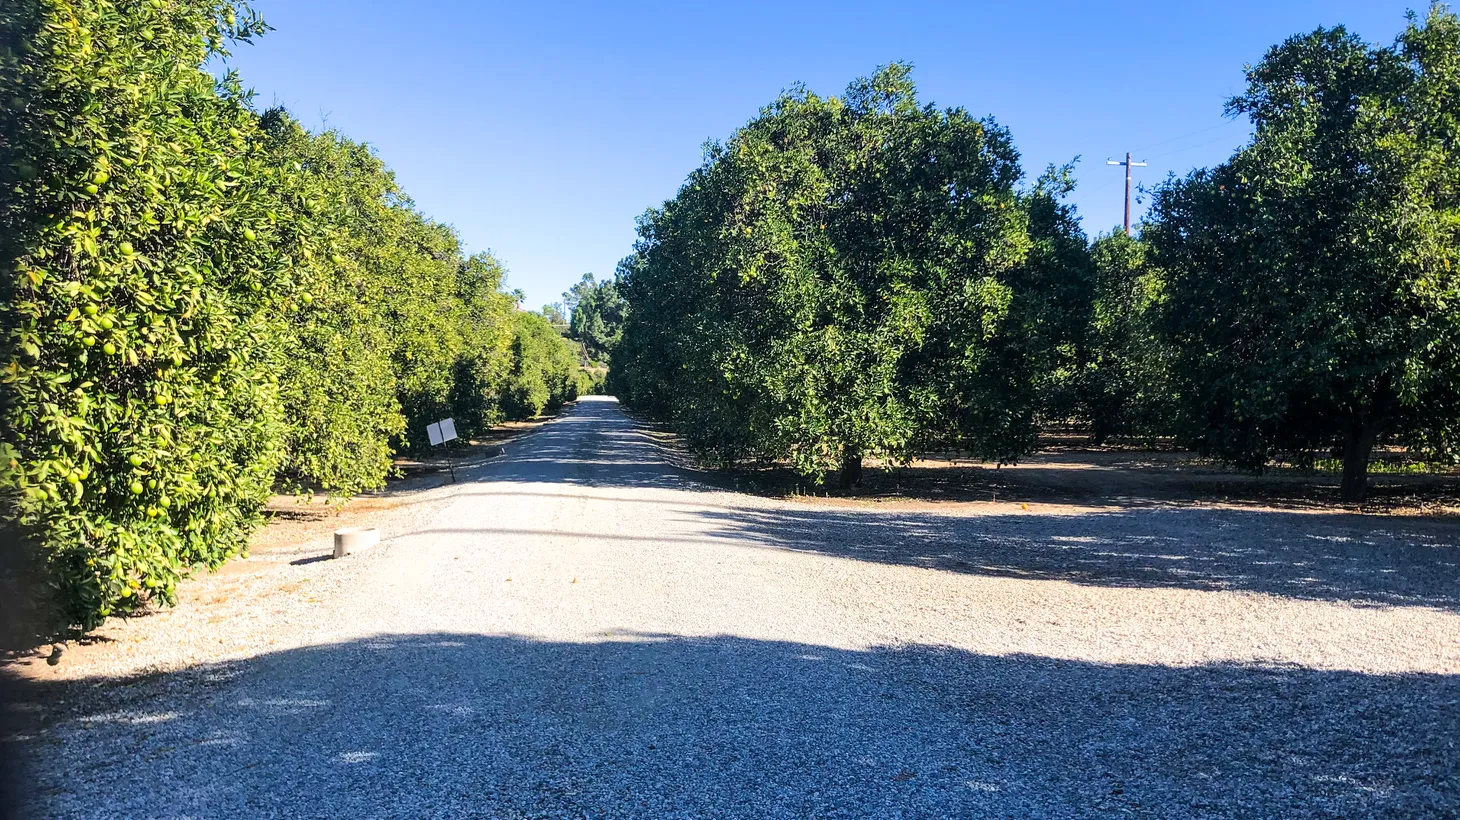 The owners of LA’s last commercial orange grove will sell most of the land to a housing developer. The rest will be turned into a park.